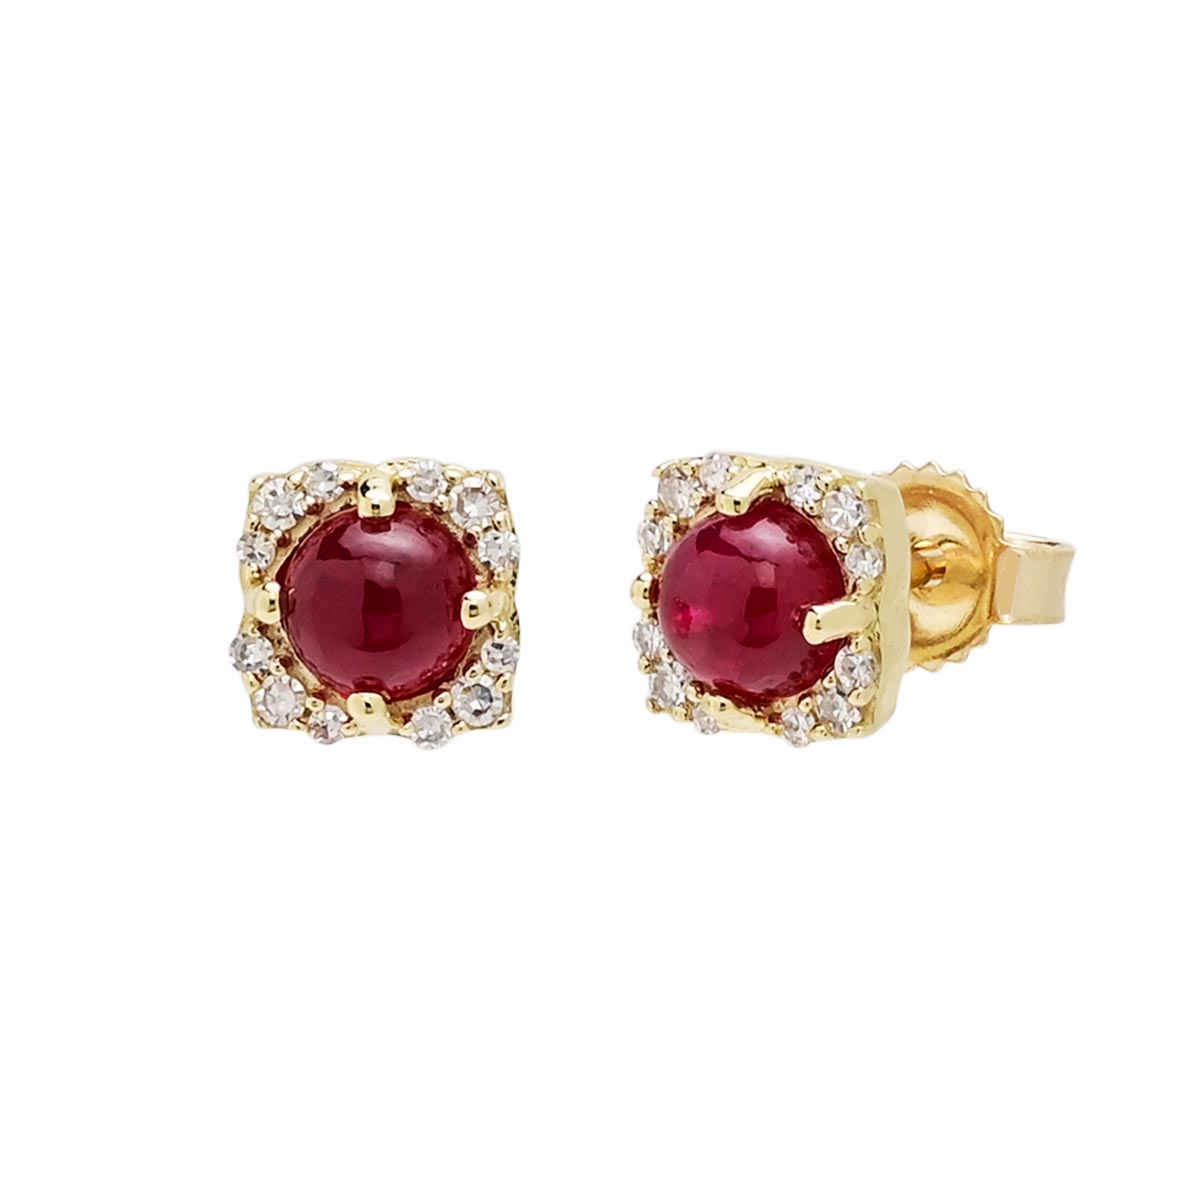 Greenland Ruby Stud Earrings in 10kt Yellow Gold with Diamonds (1/10ct tw)